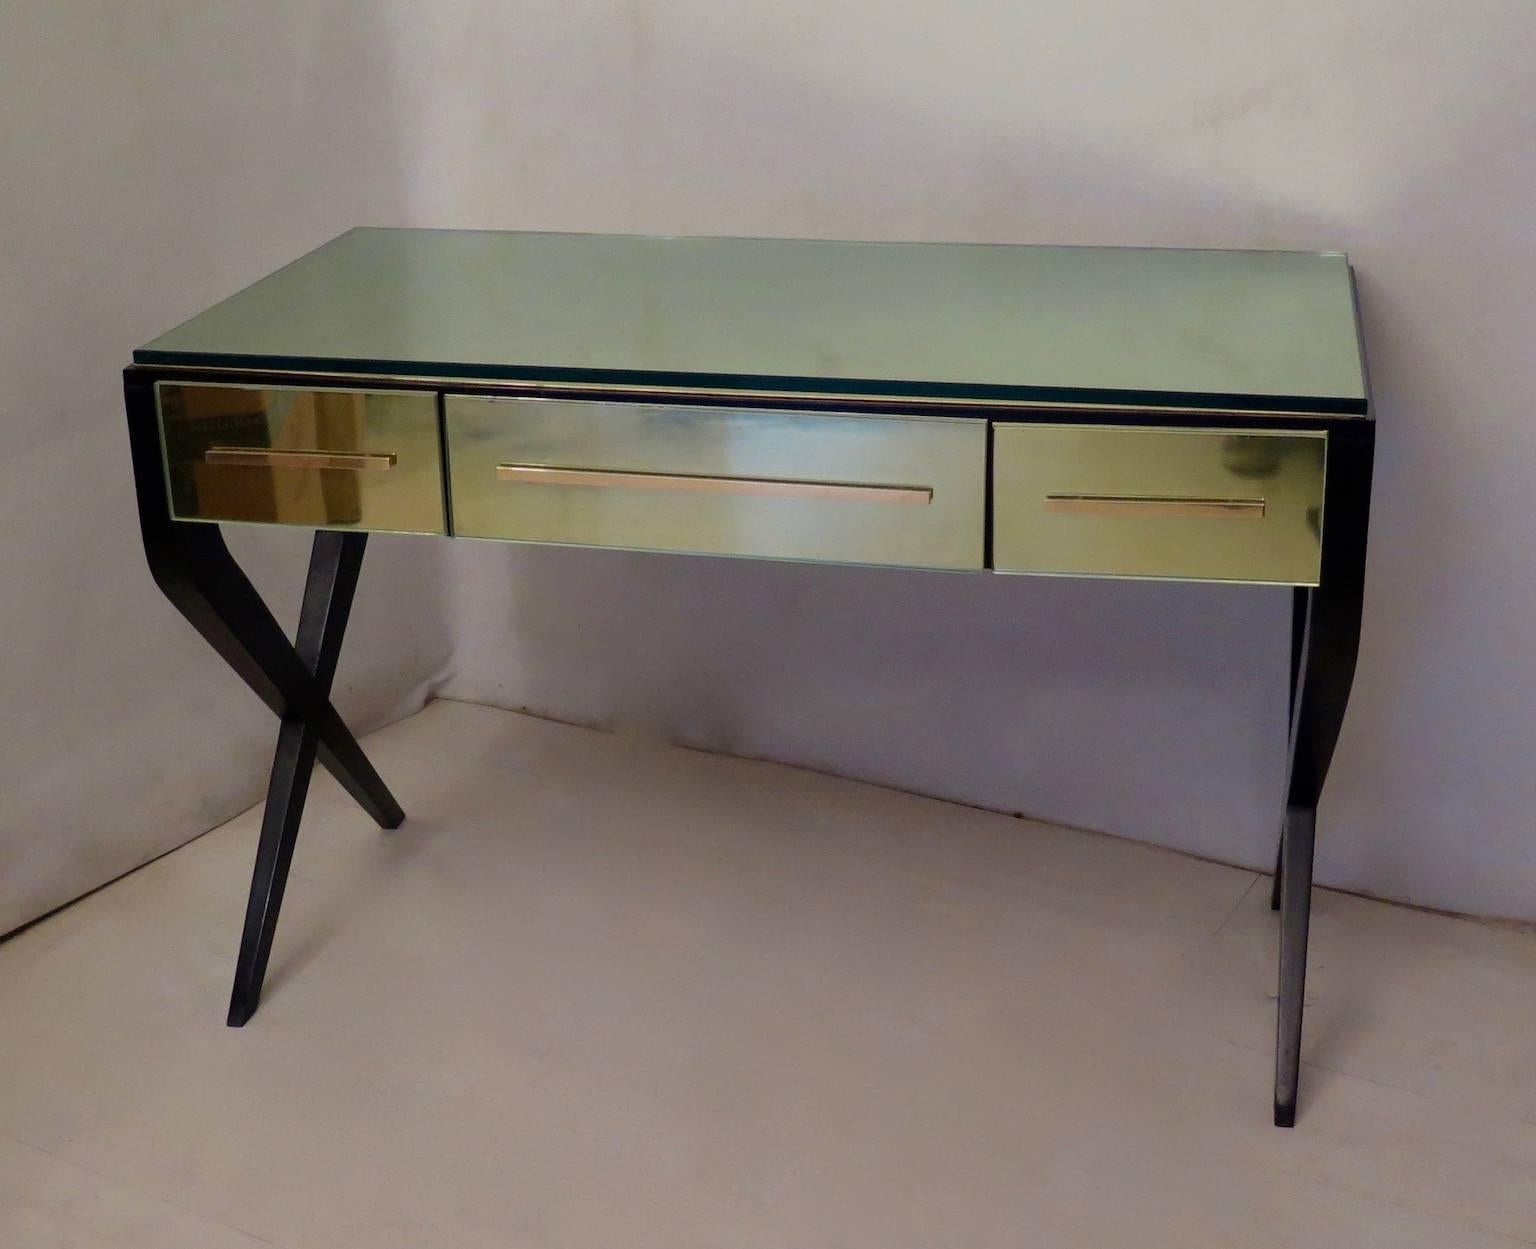 Gorgeous desk or writing table, designed by Gio Ponti.
All in black lacquered wood, with the top and three drawers covered with a polished brass plate, with a monolithic glass over (1.5 cm, 0.6 inches). The central drawer is larger than the two